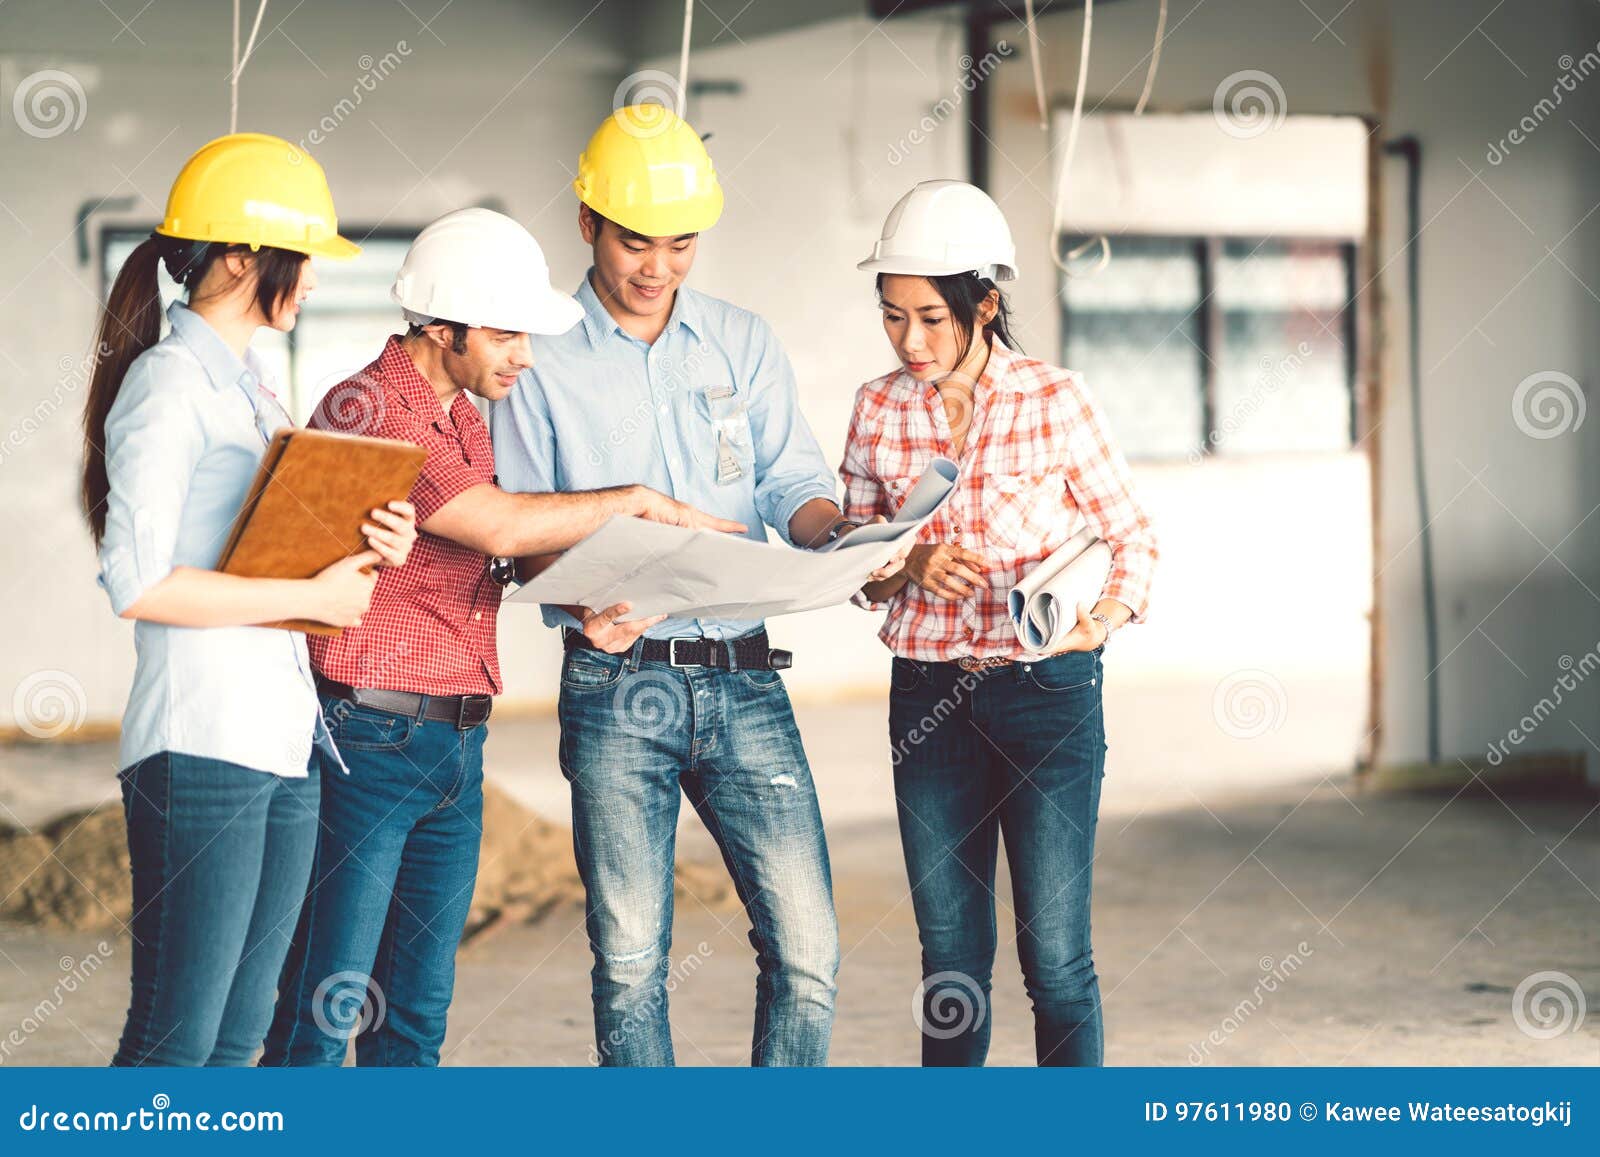 multiethnic diverse group of engineers or business partners at construction site, working together on building`s blueprint